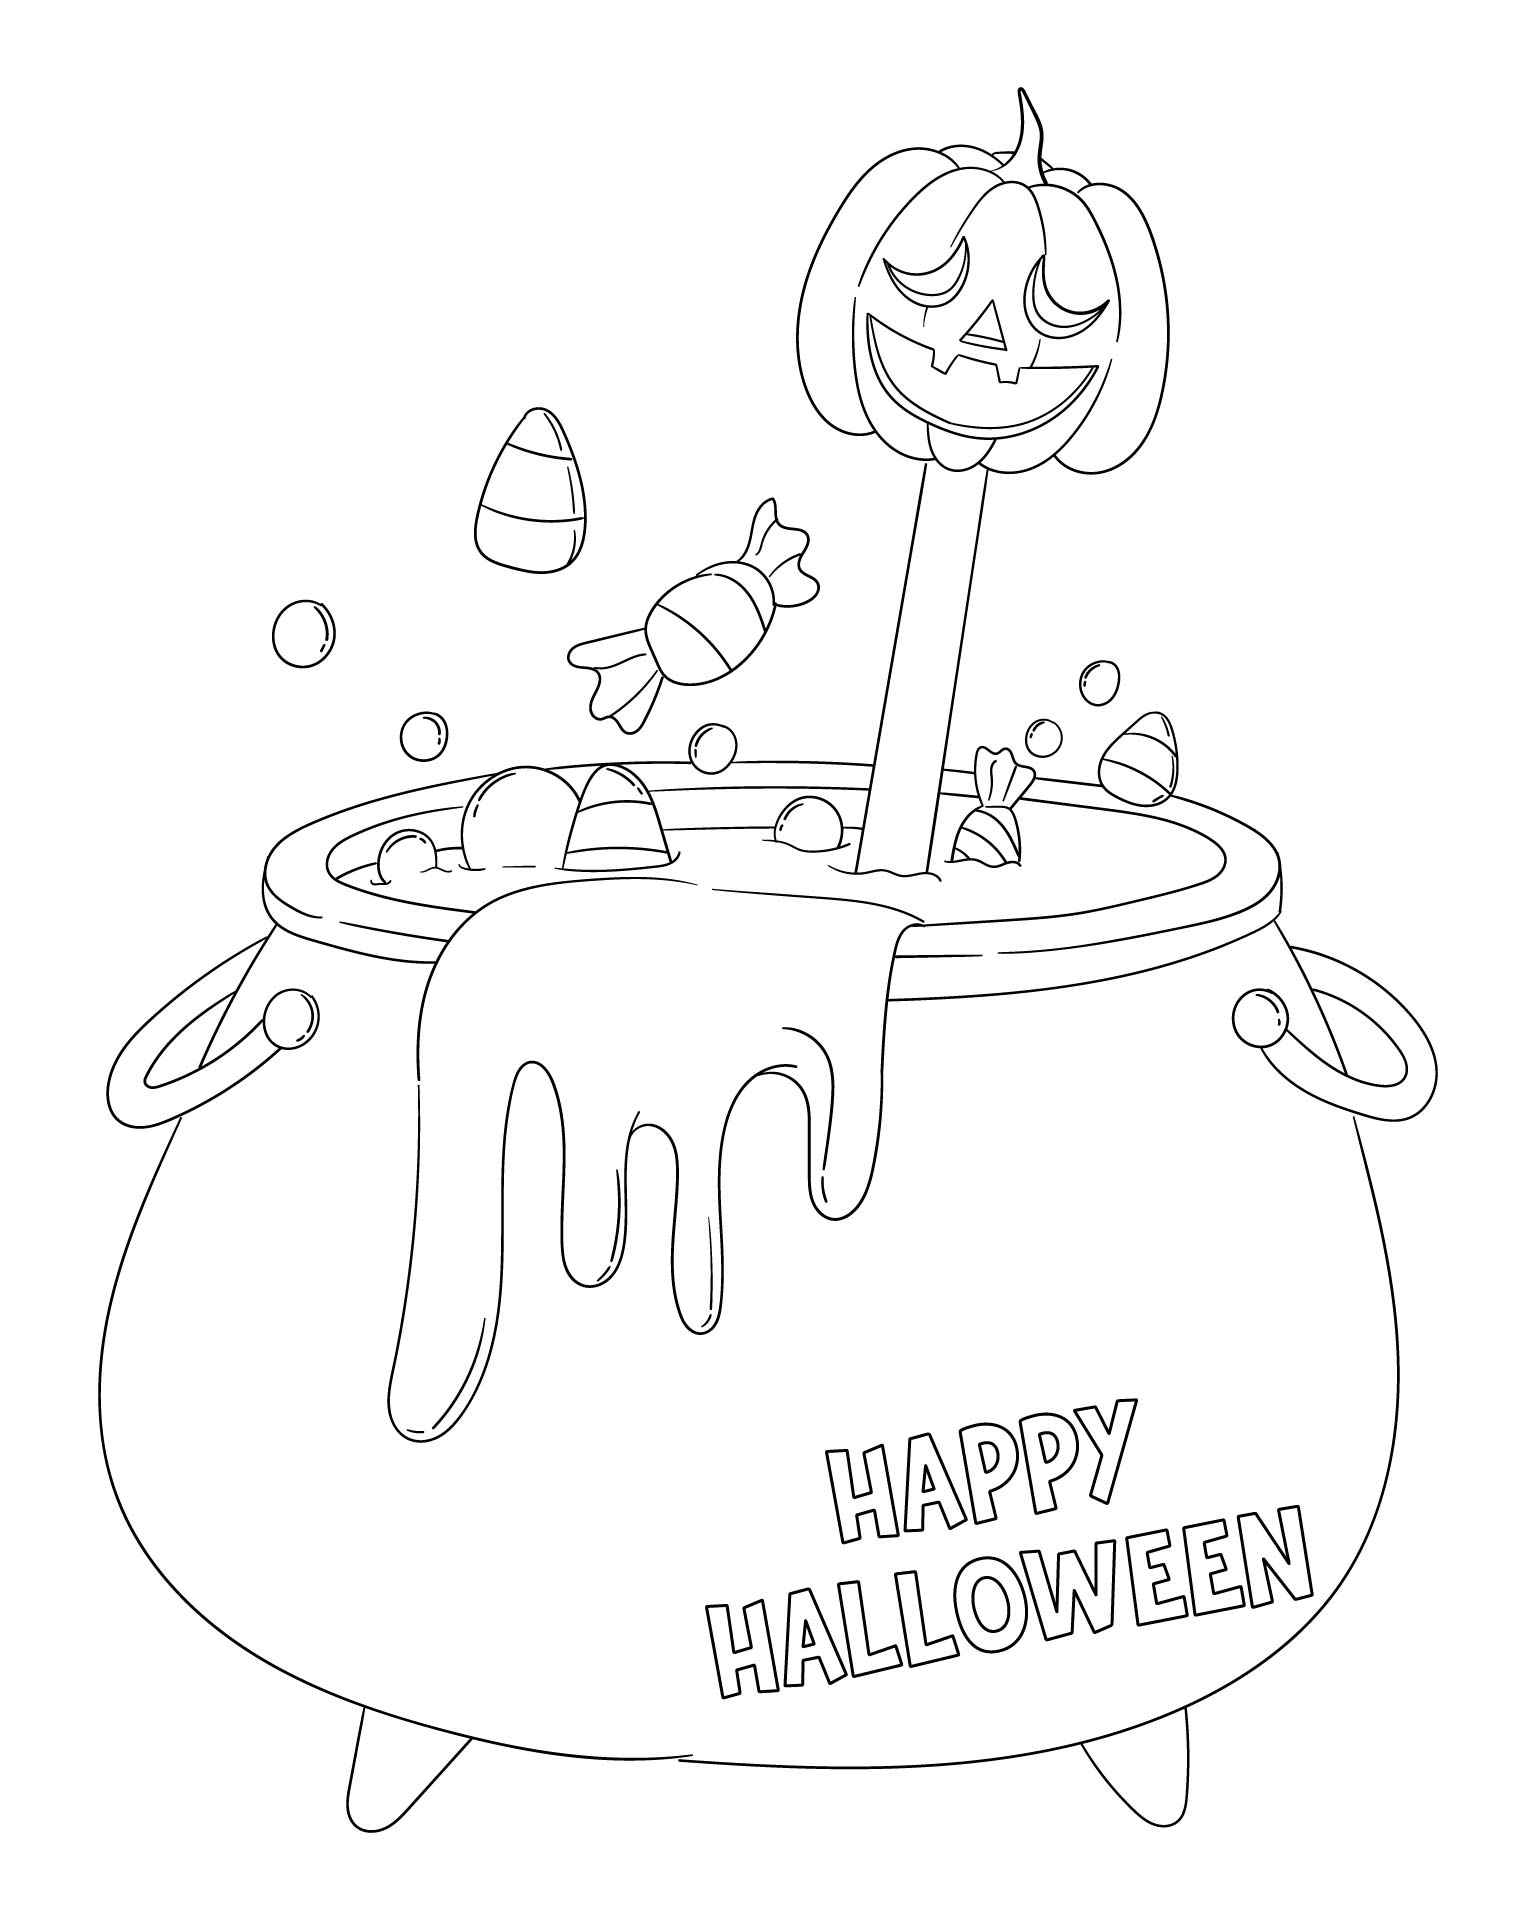 Printable Uncolored Happy Halloween Coloring Page With Candy